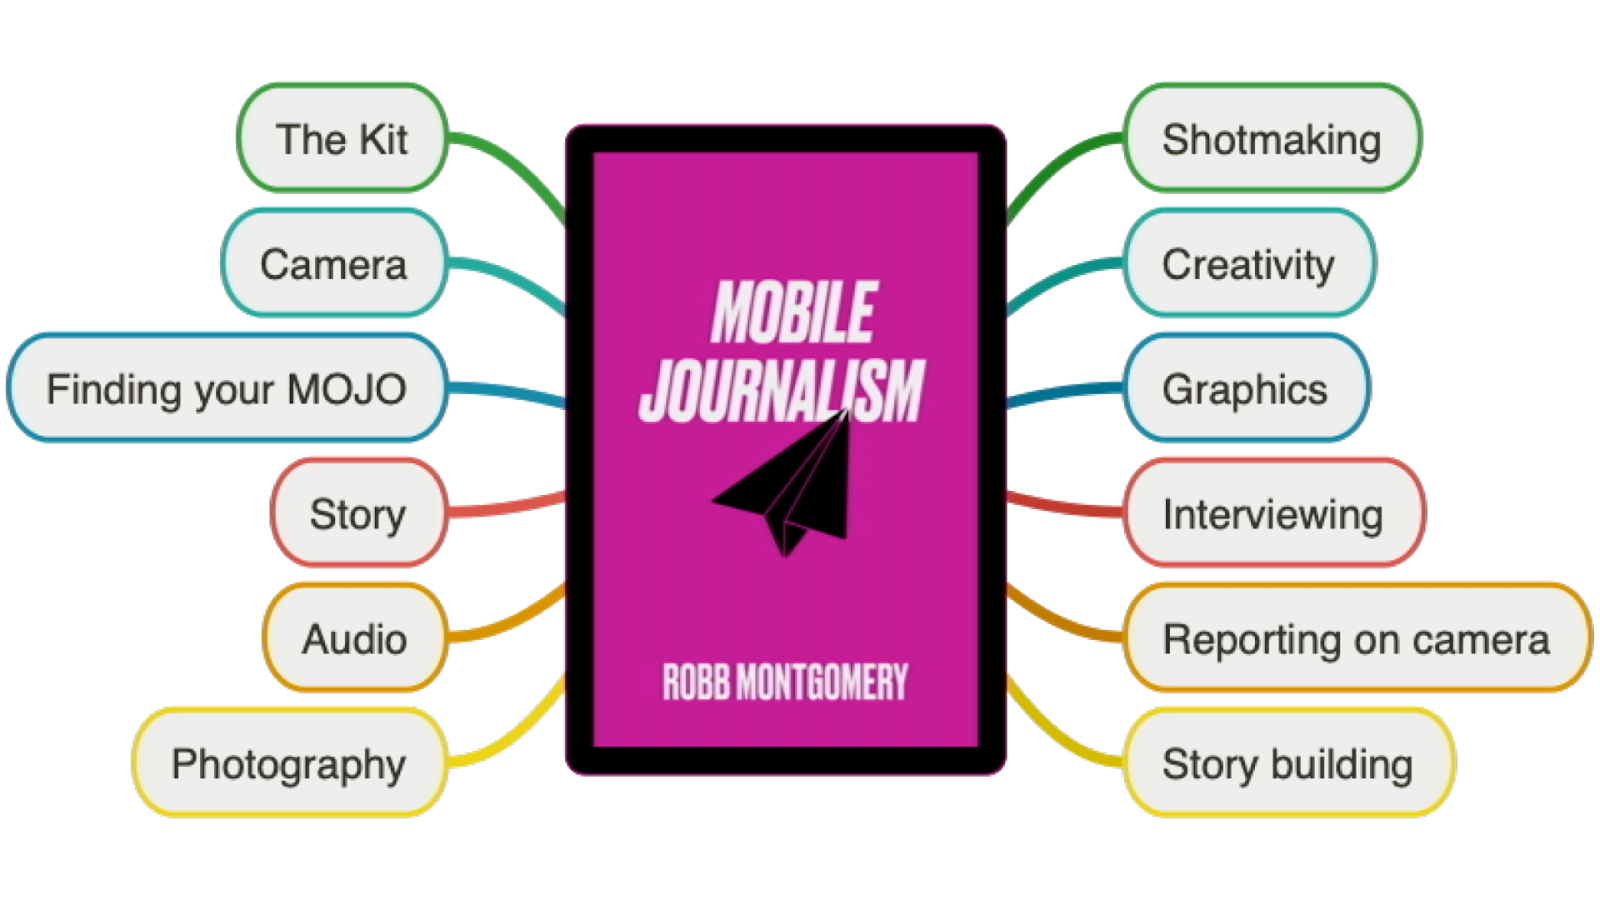 Robb Montgomery is the author of the Mobile Journalism textbook.